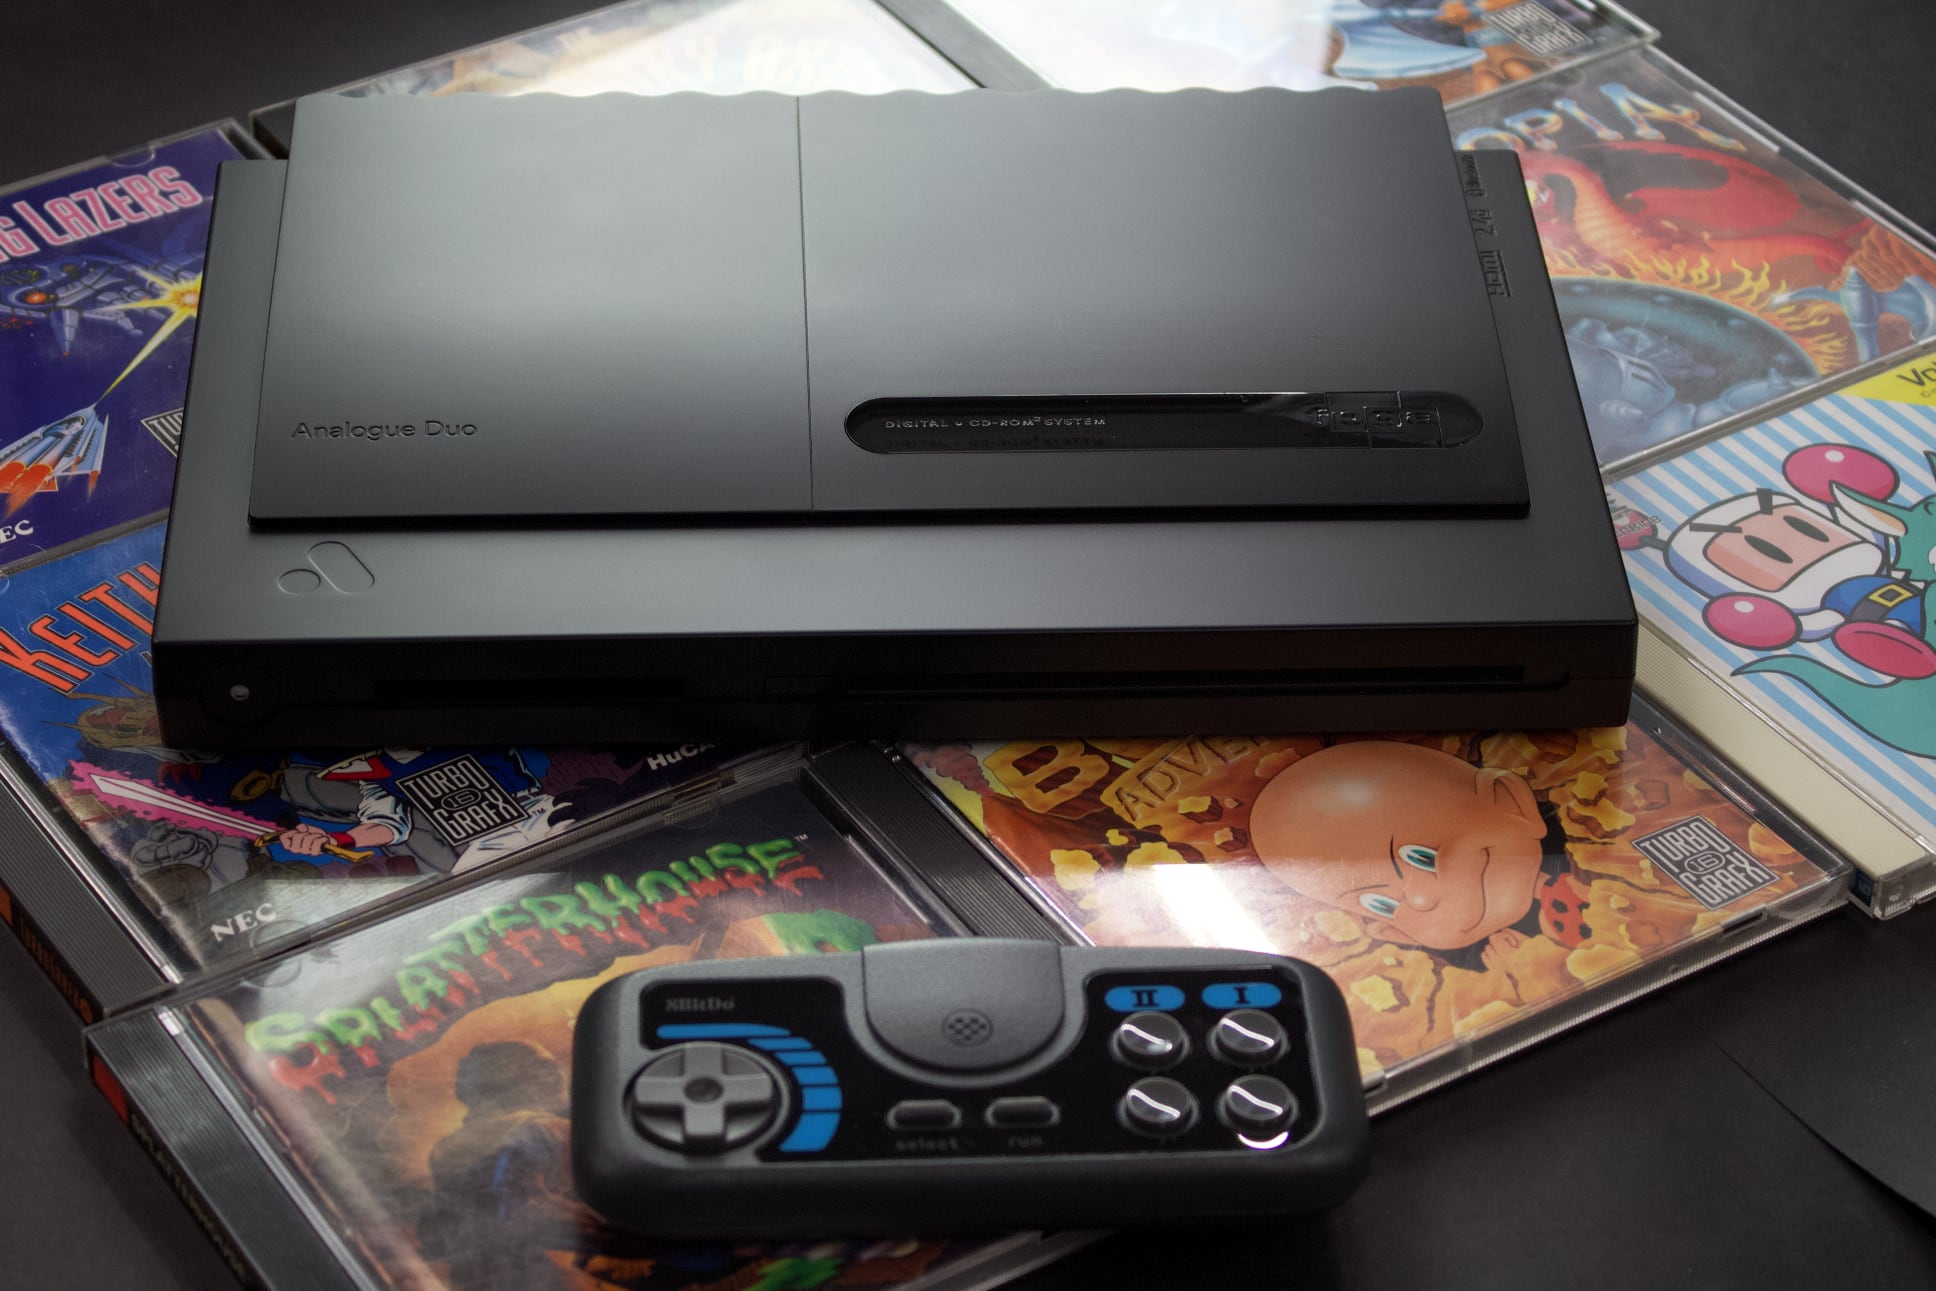 The Analogue Duo, on top of several game CD cases, and a blue and black controller beneath it